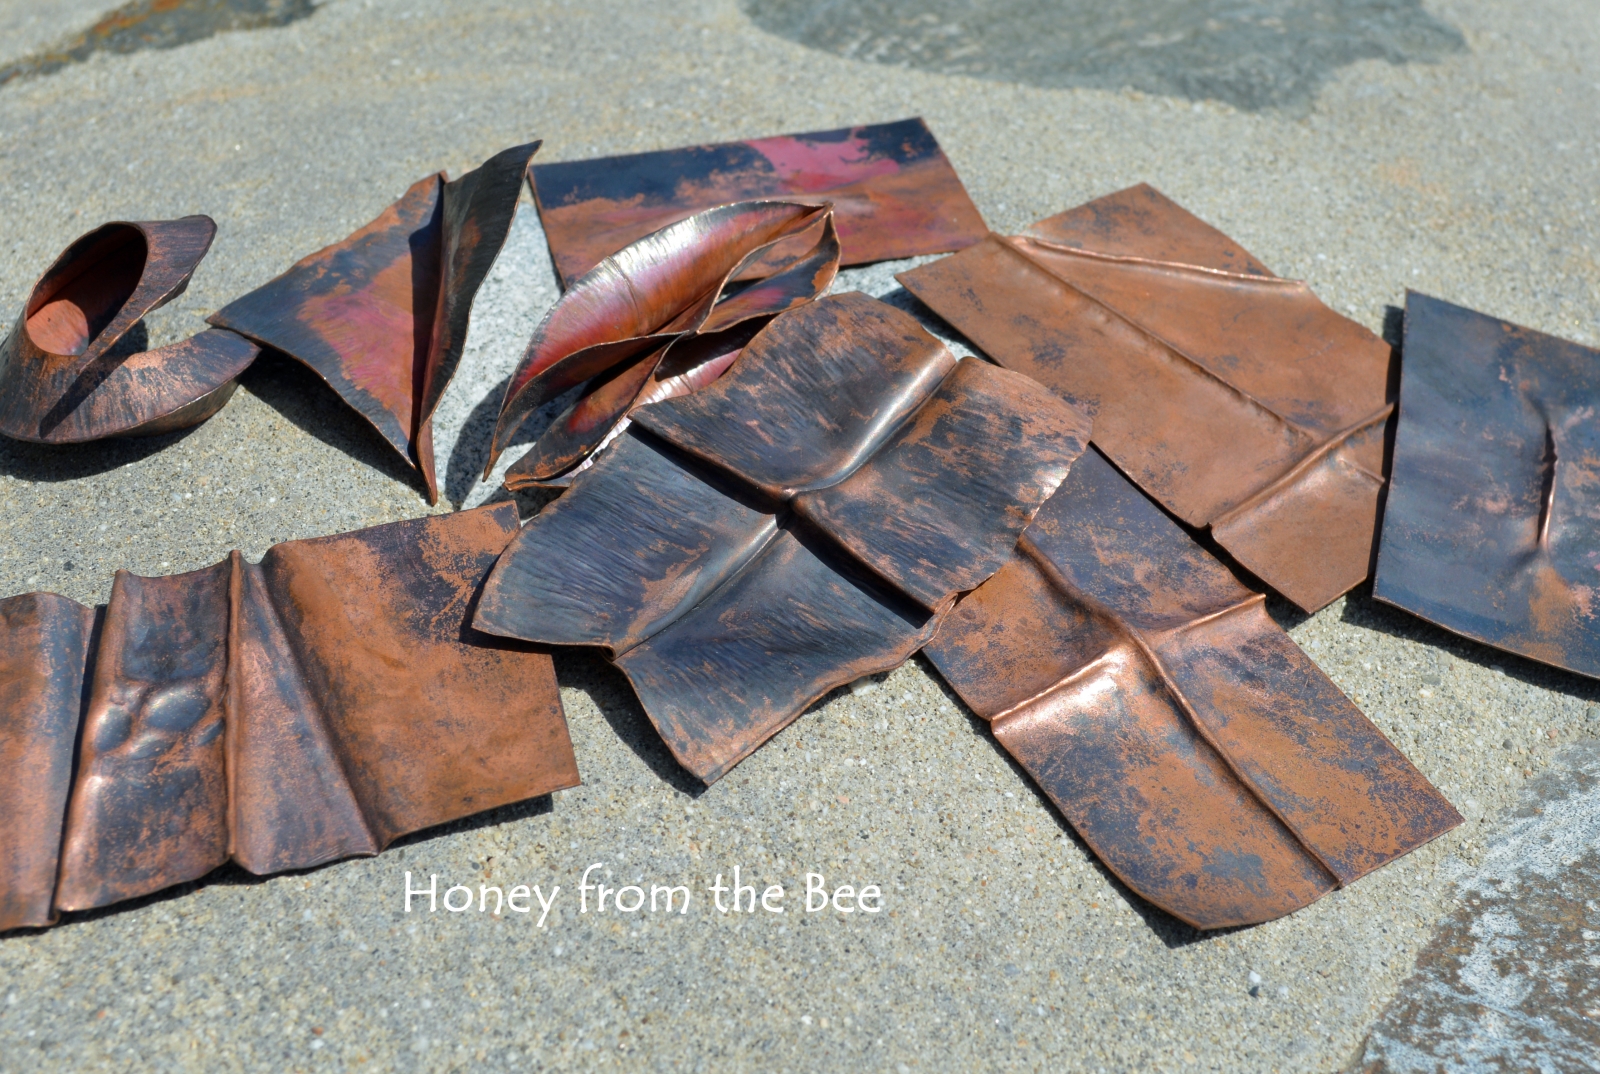 Foldformed copper samples by Honey from the Bee